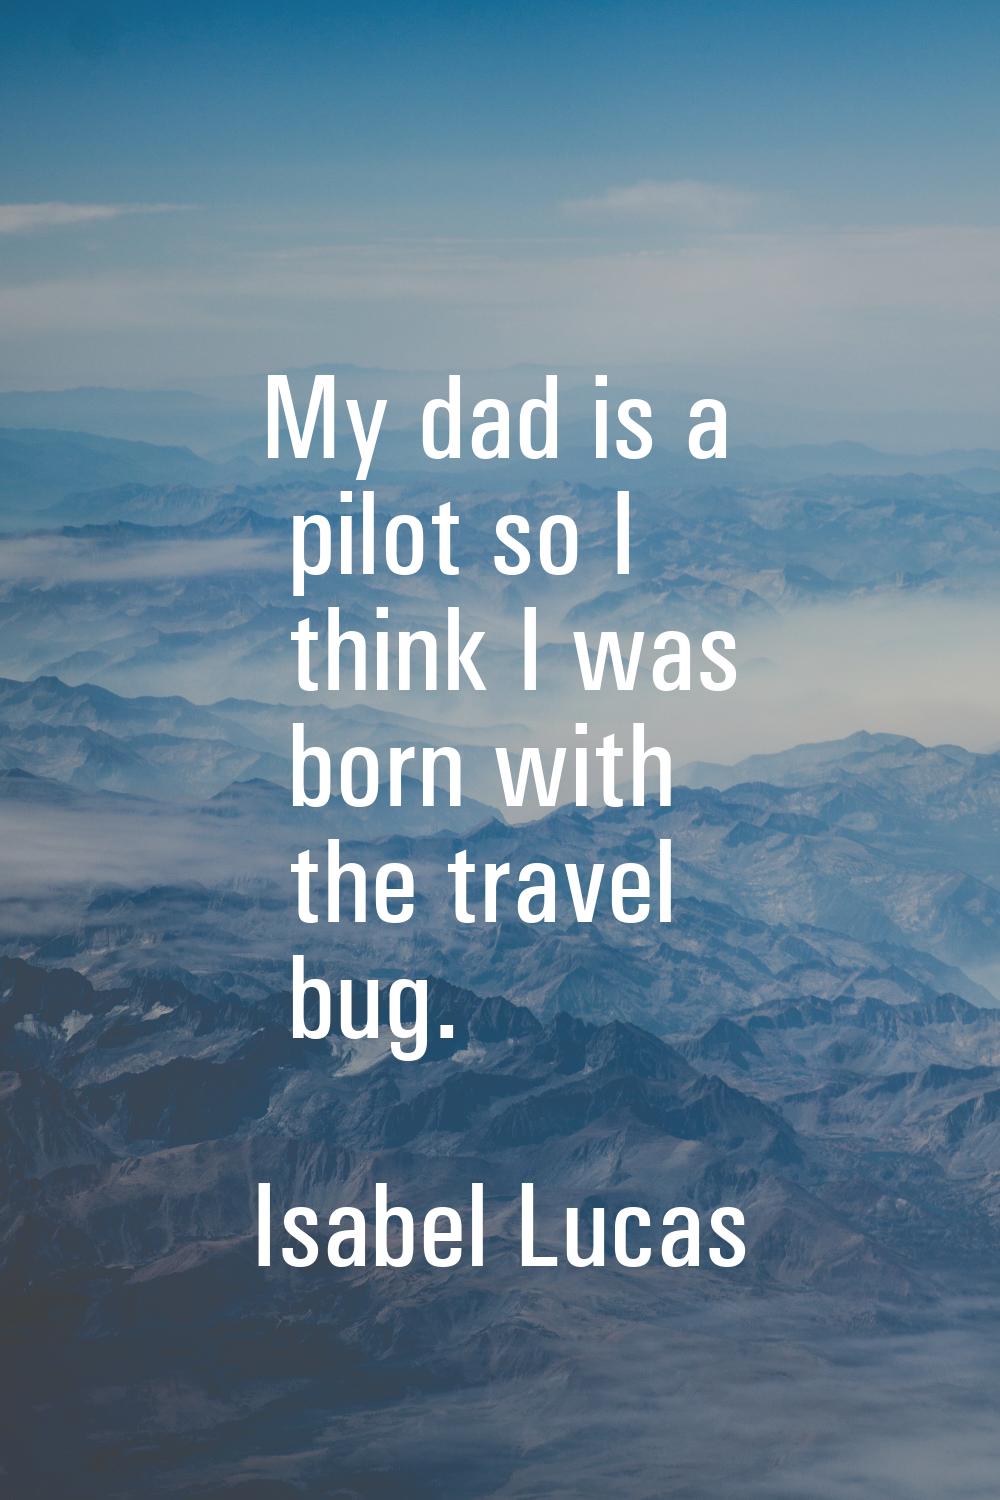 My dad is a pilot so I think I was born with the travel bug.